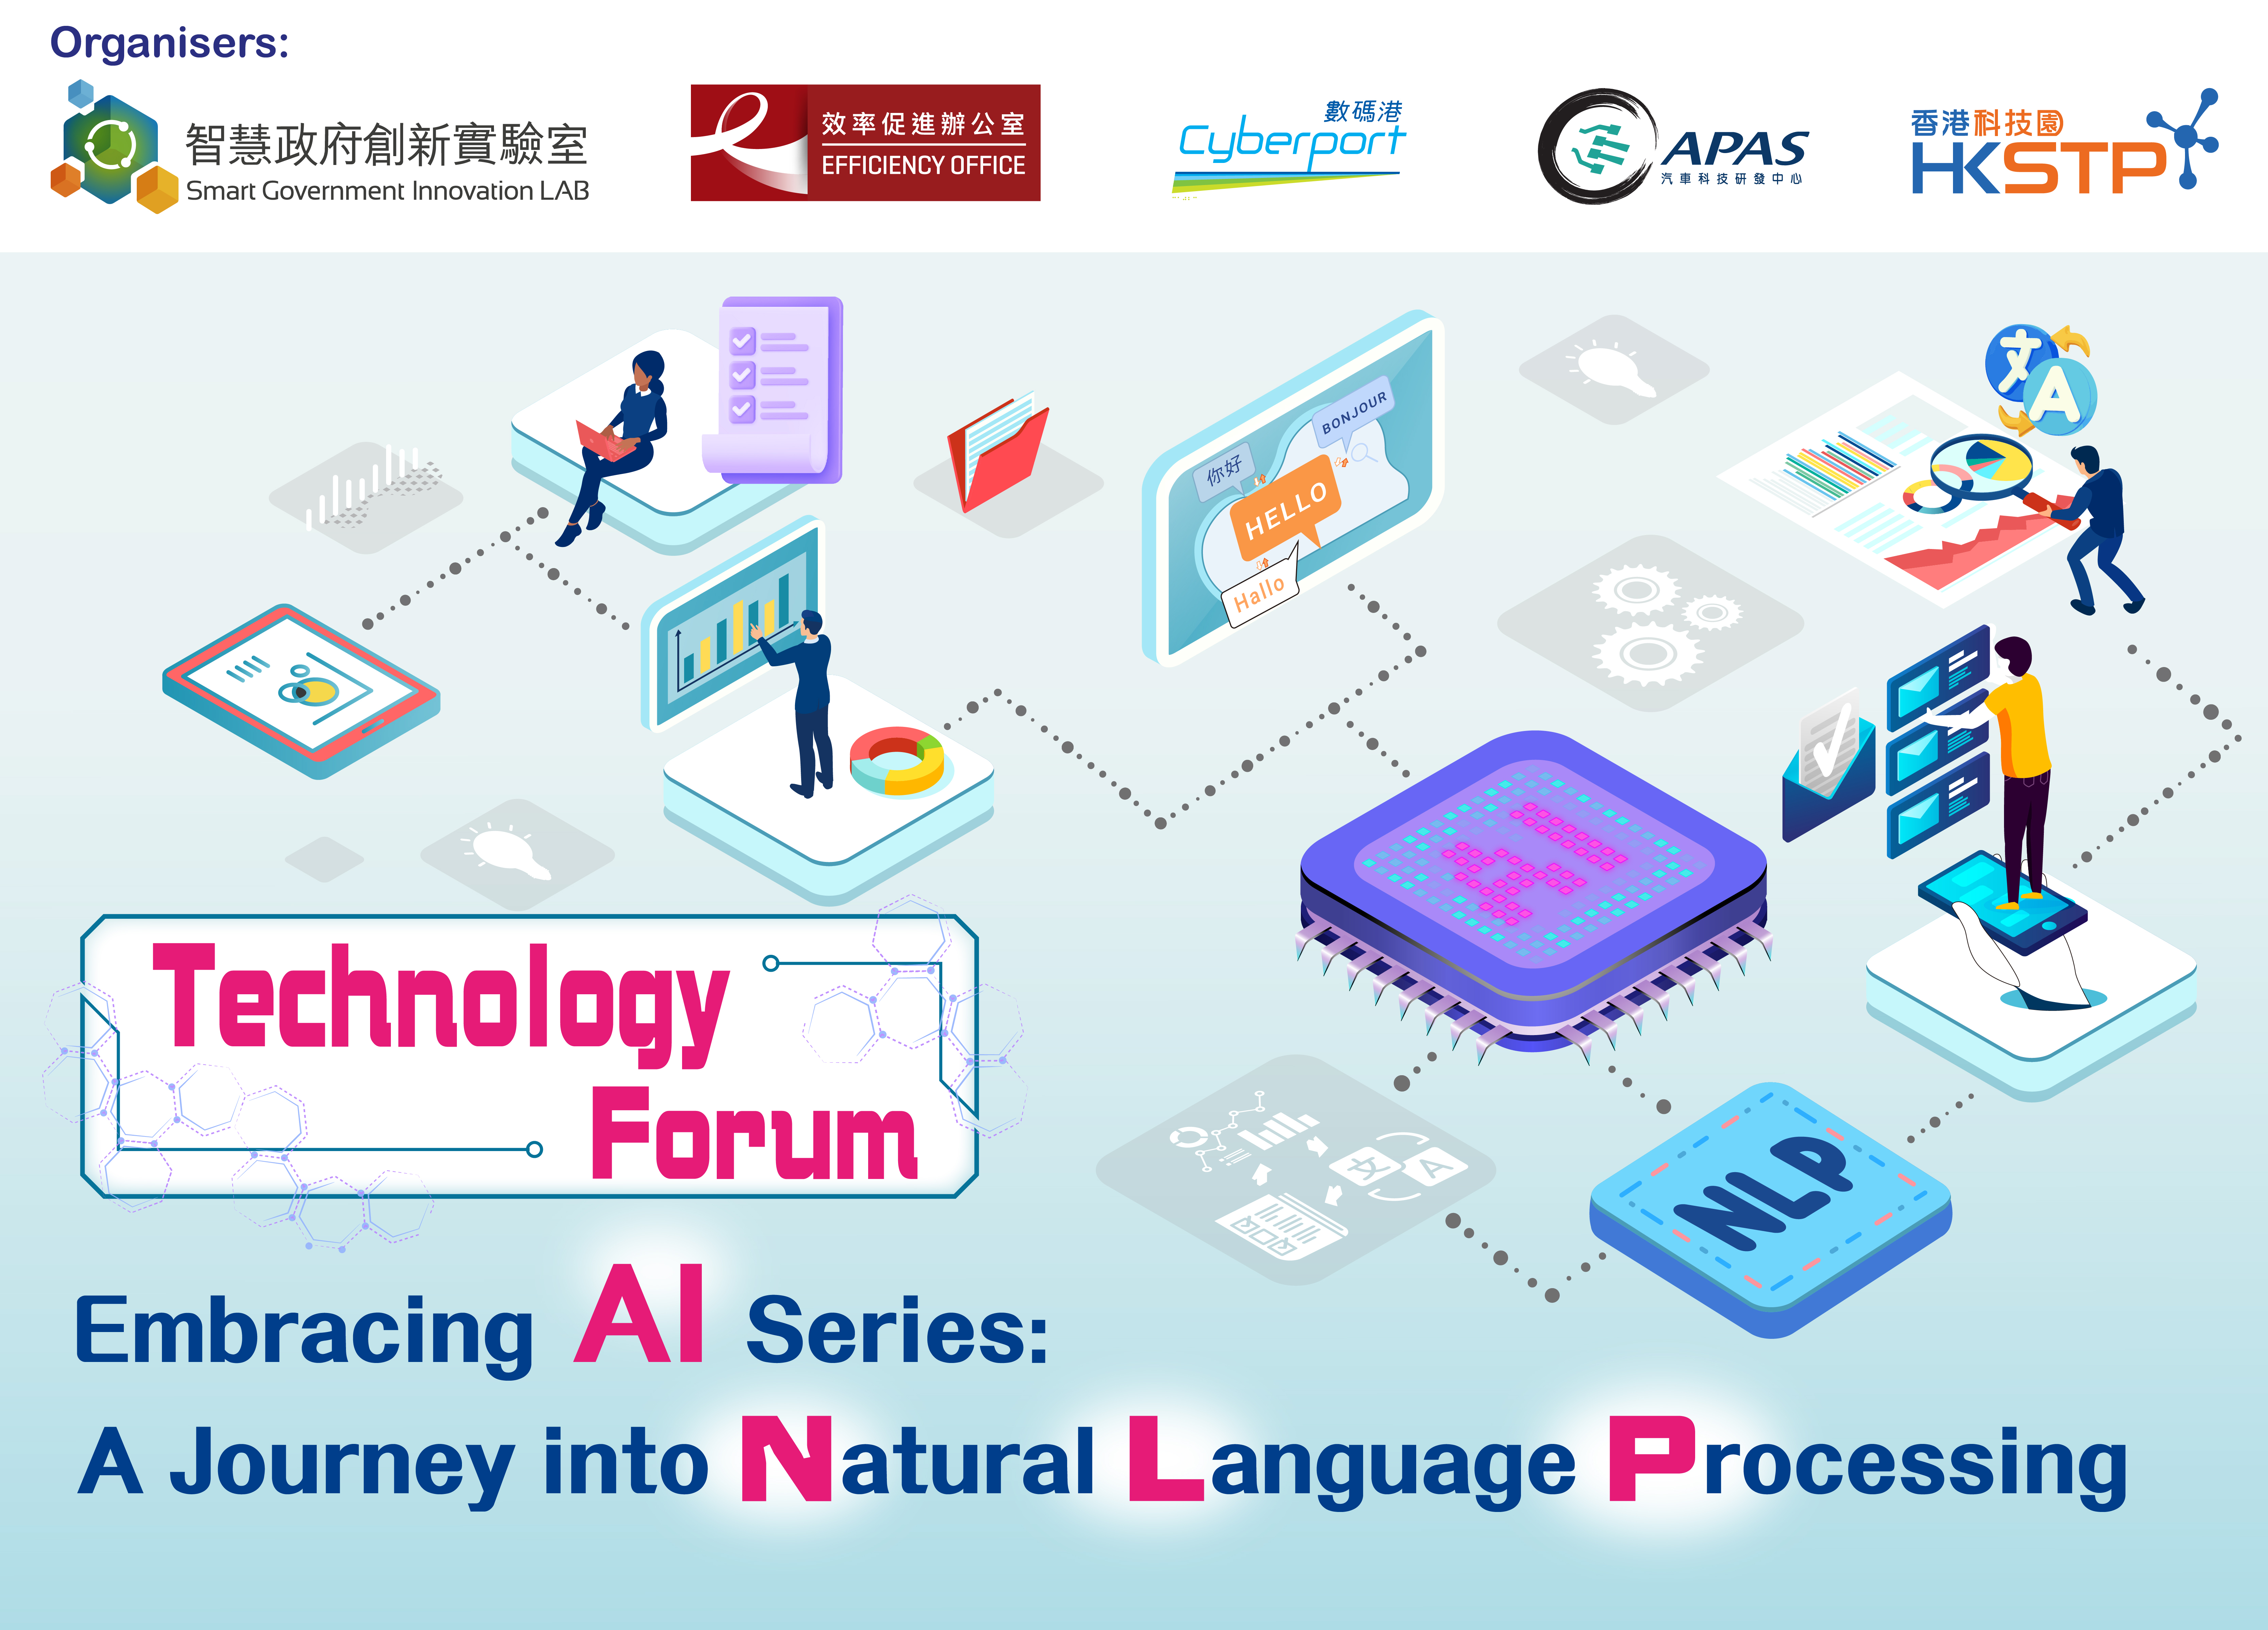 Technology Forum - Embracing AI Series: A Journey into Natural Language Processing